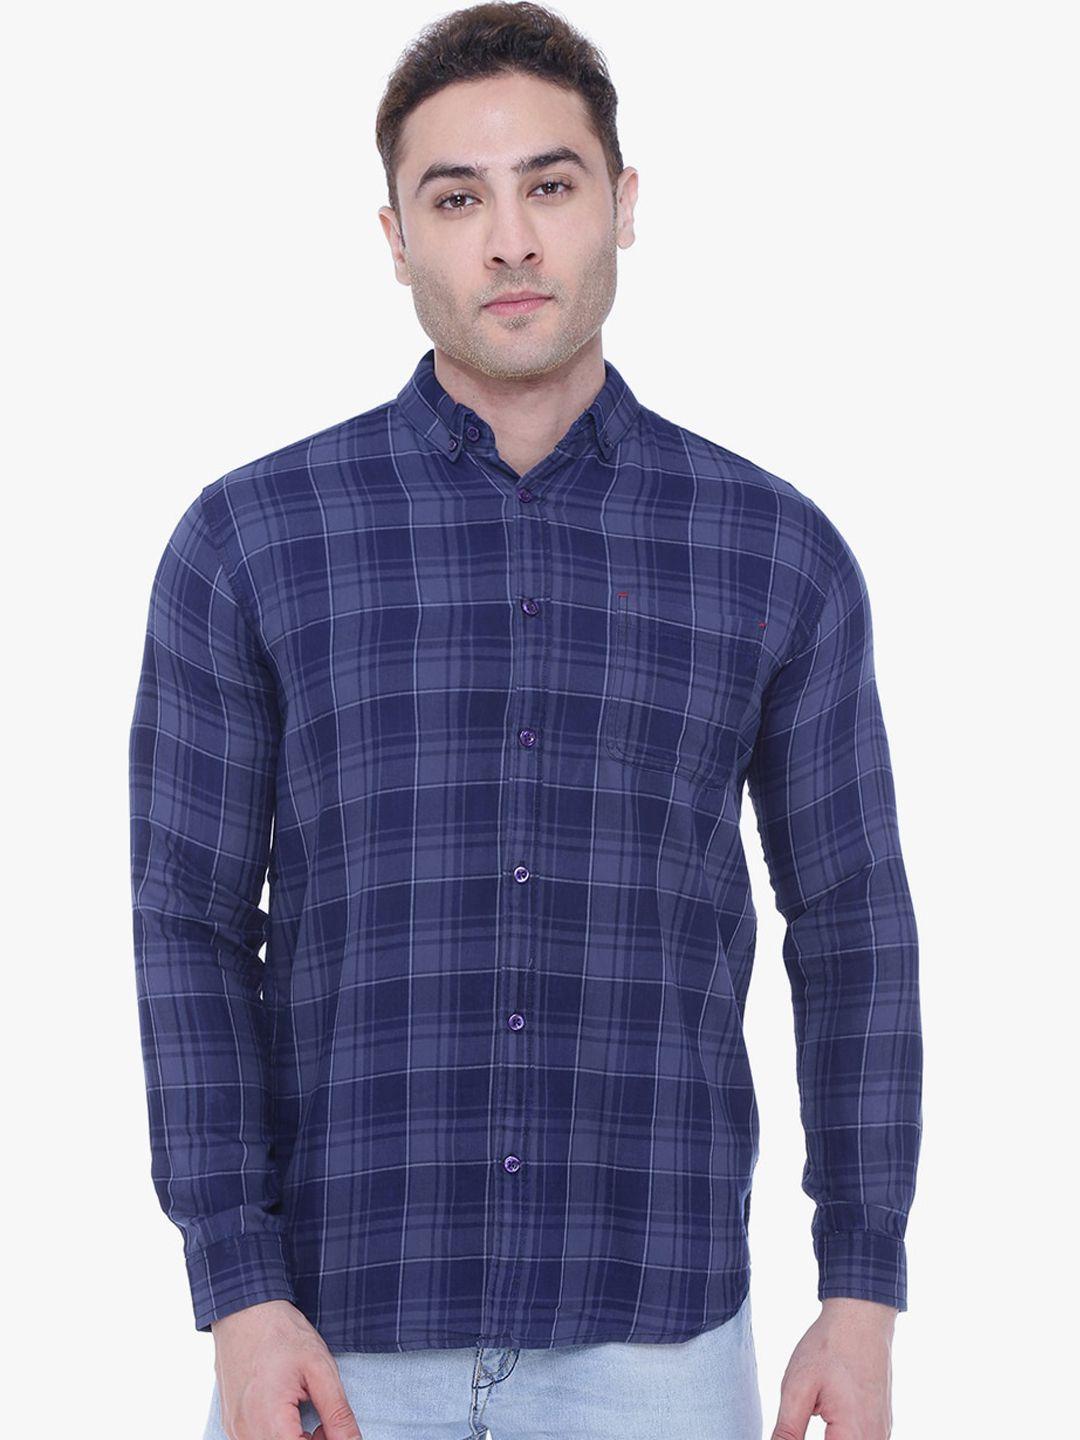 kuons-avenue-men-navy-blue-slim-fit-opaque-checked-casual-shirt